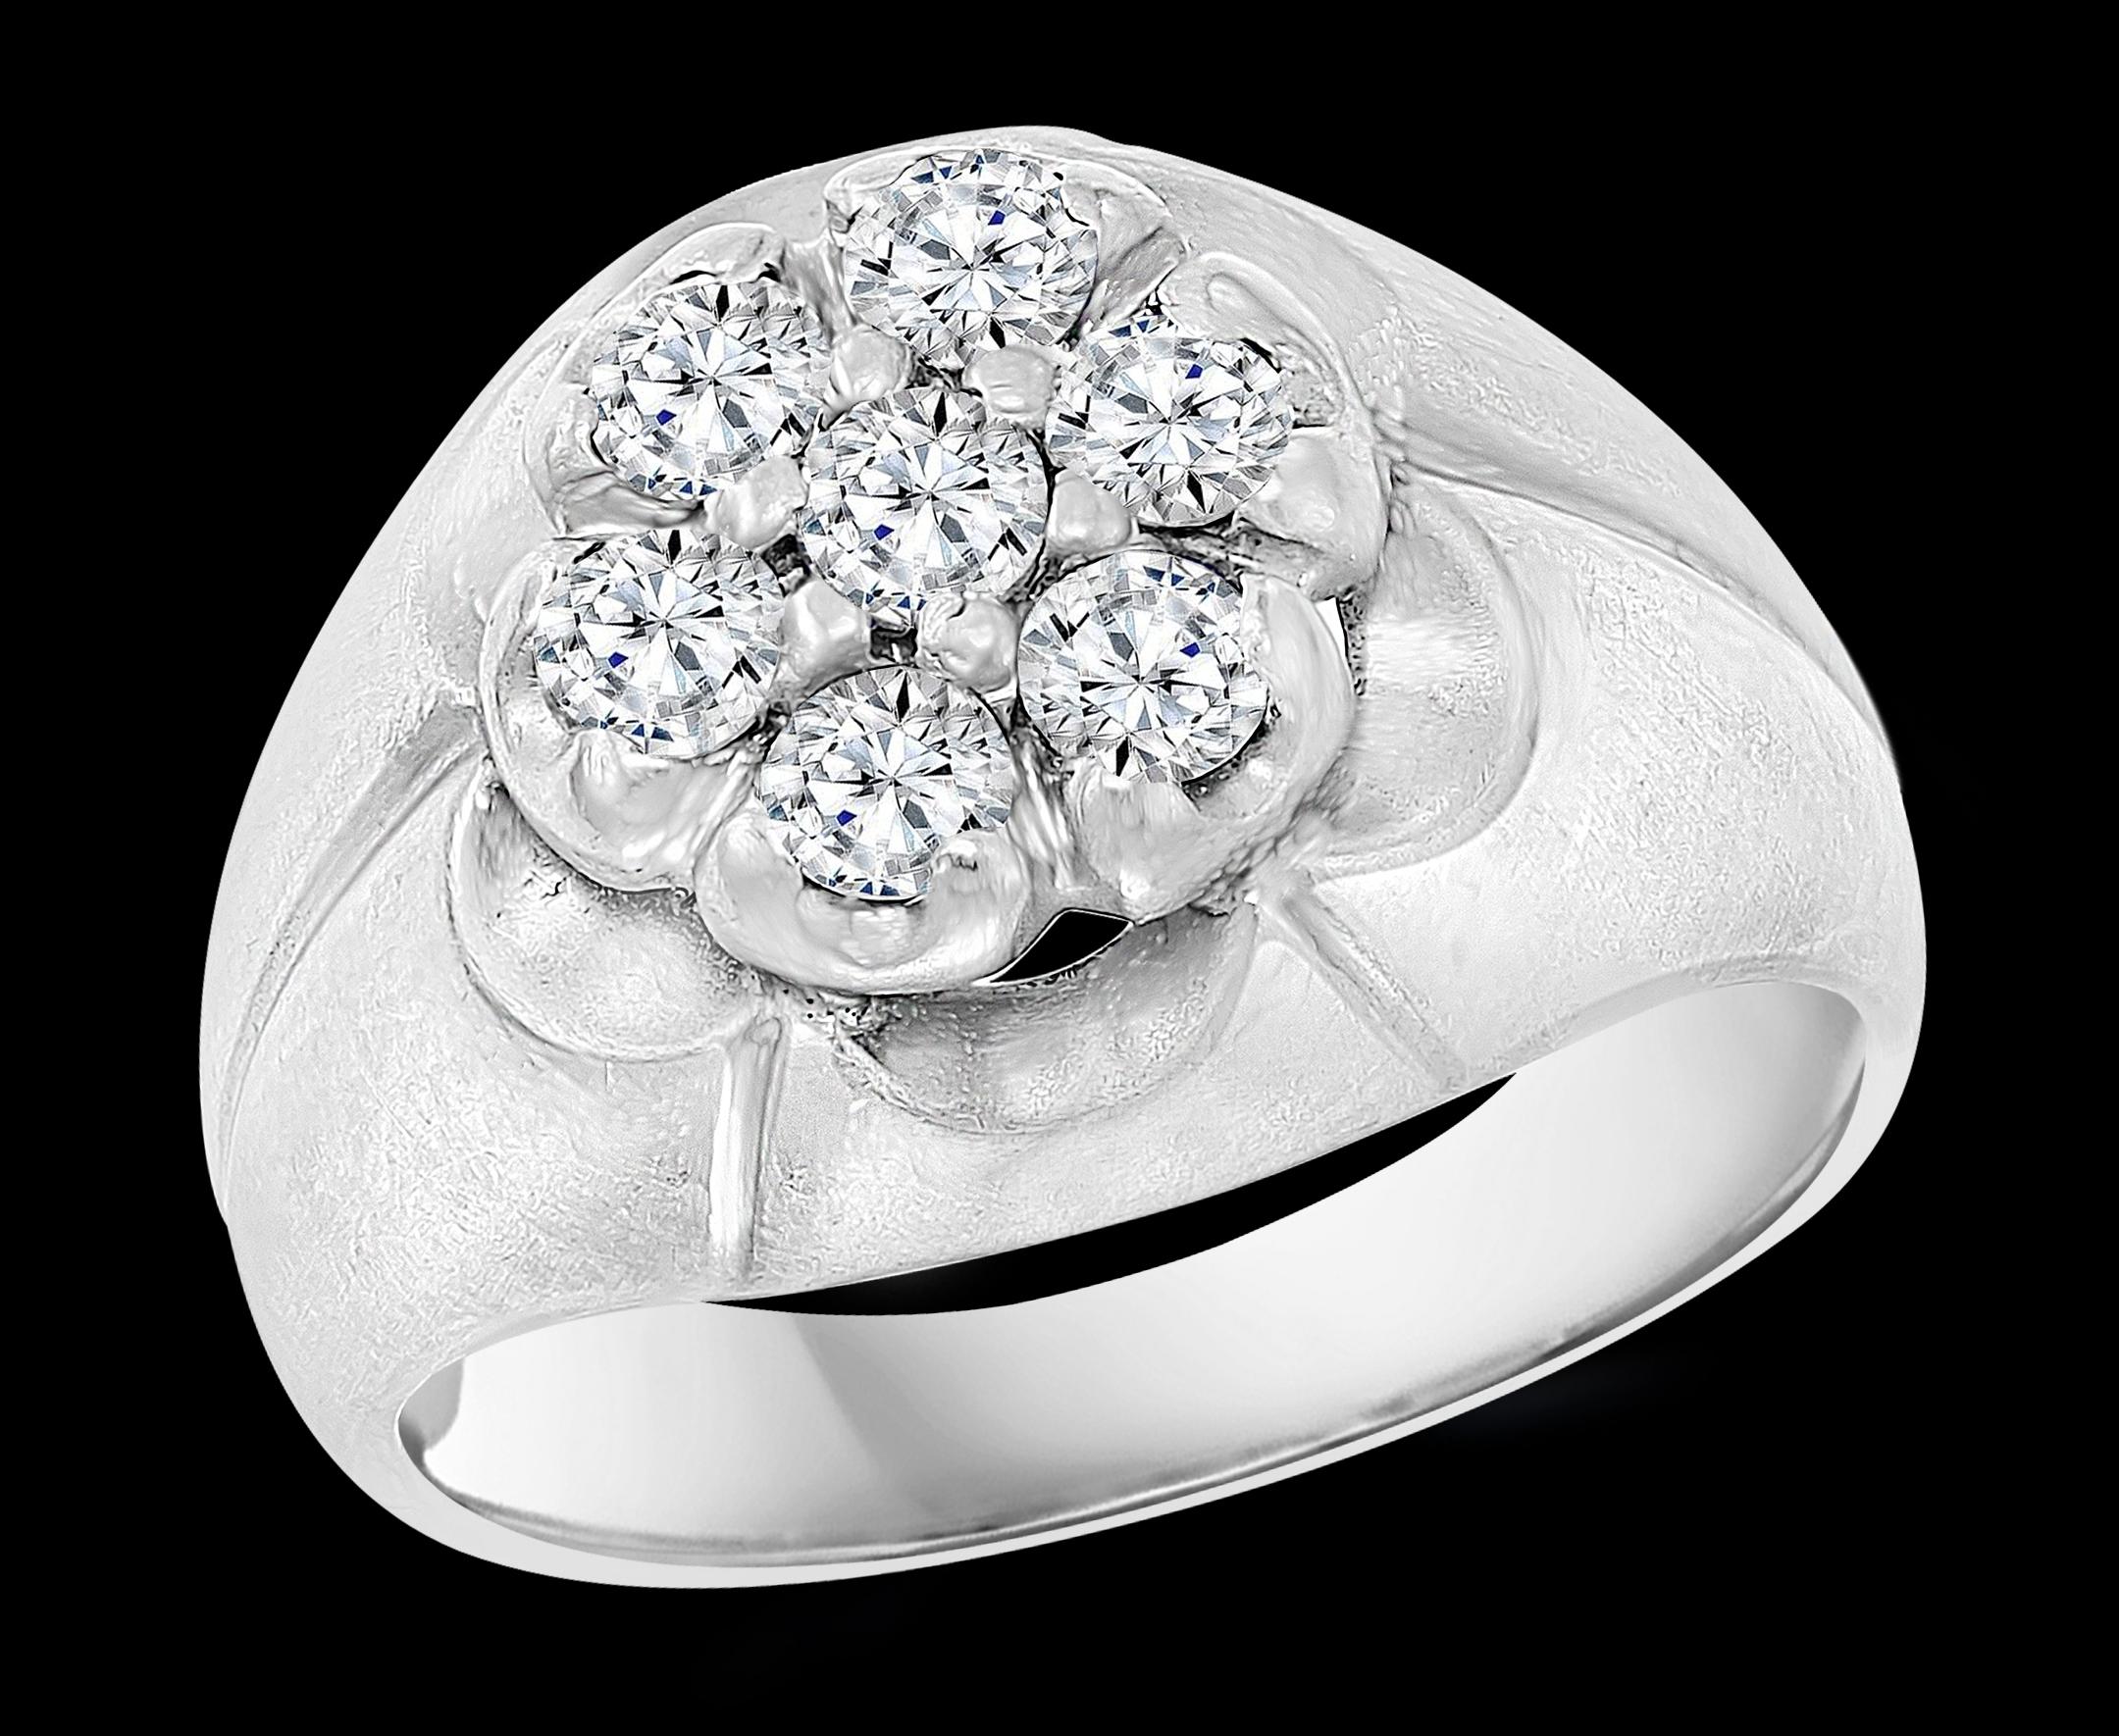 1.0 Carat, 7 Diamonds Traditional Men's Ring 14 Karat White  Gold Ring Estate
This is a Nice traditional 7  diamond  ring  from our premium wedding collection for Men
 7  Round diamonds  are set to make a Flower 
Diamonds :  Approximately 1.0